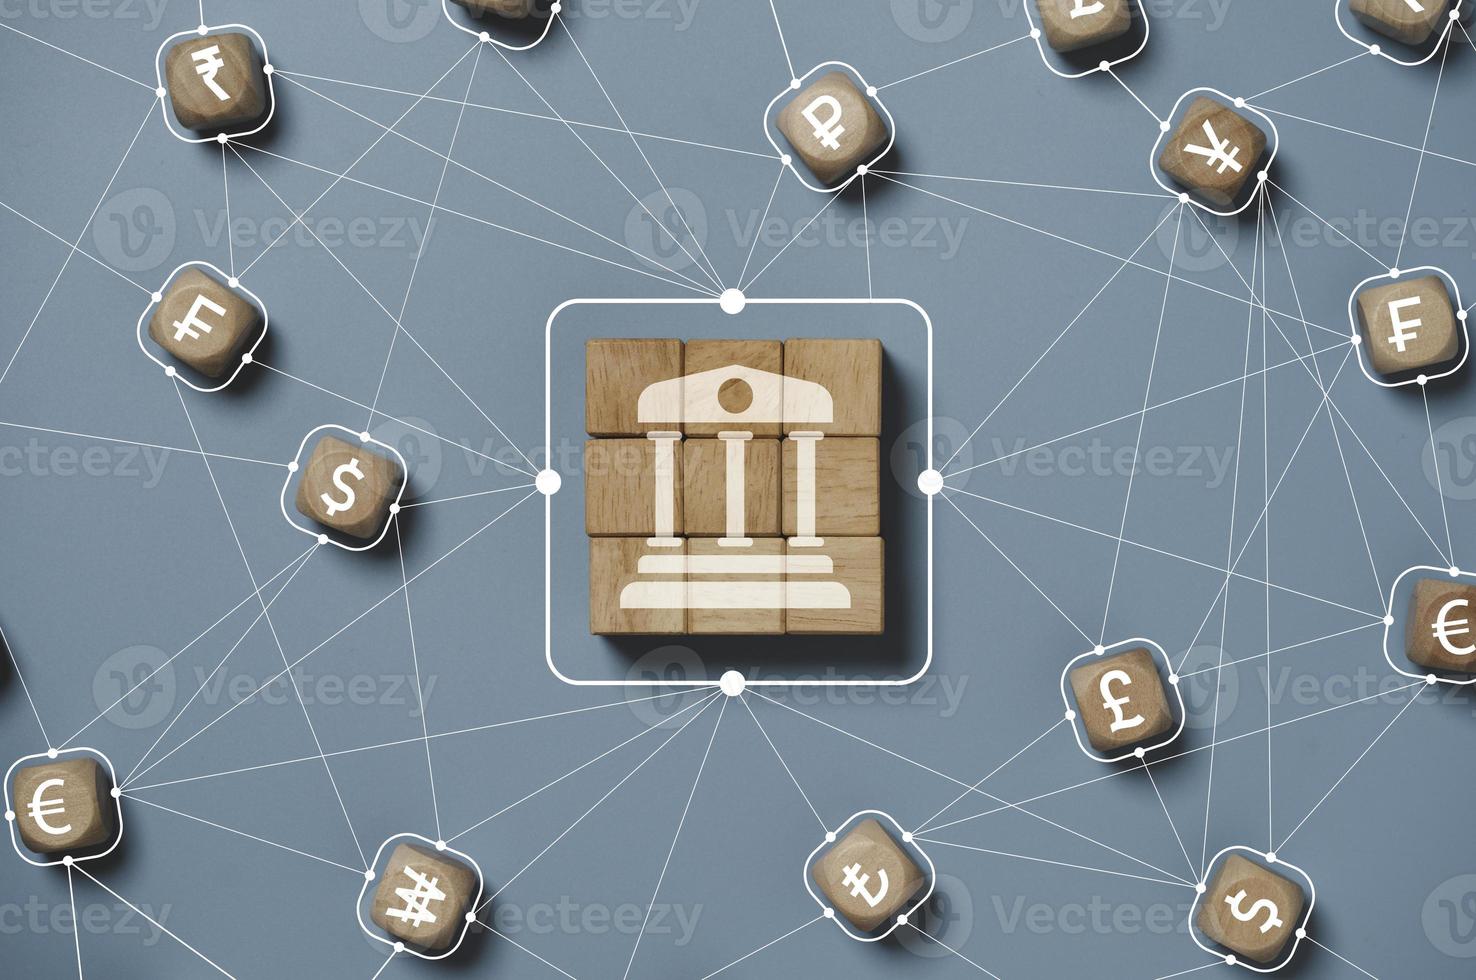 Central banking icon connect linkage with currency sign include US dollar Euro Yen Yuan and pound sterling for global money exchange and transfer or forex concept. photo